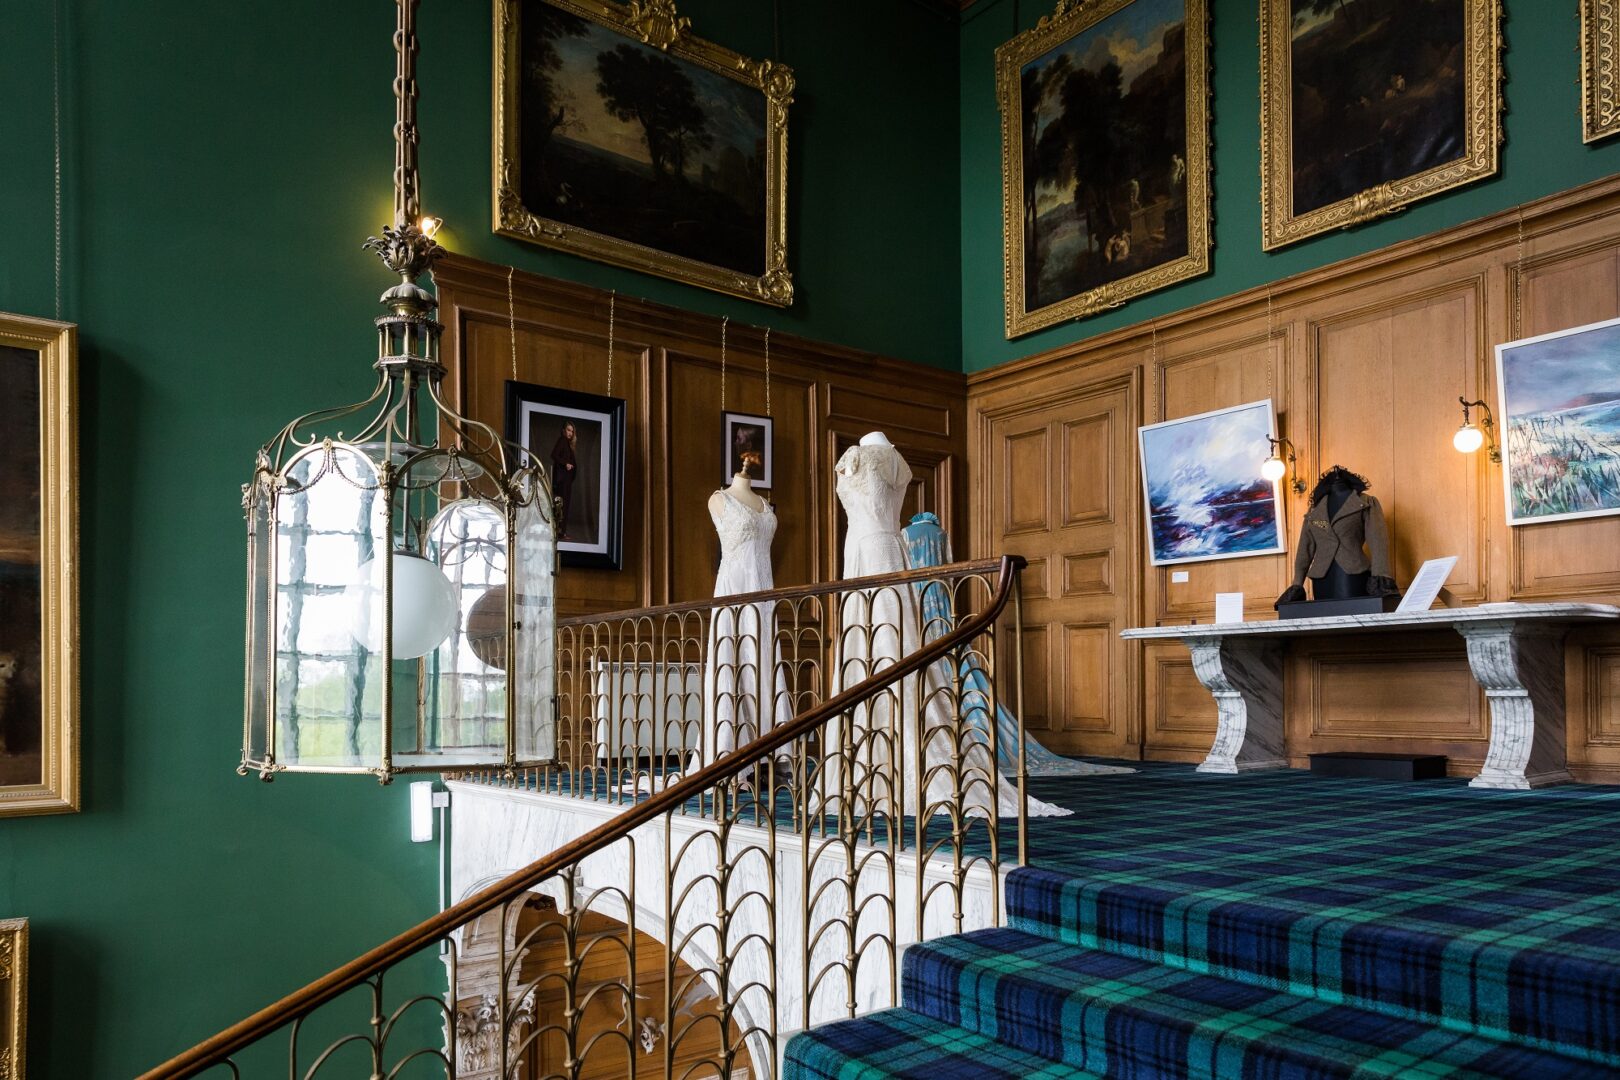 The Grand Staircase Landing area at Dalkeith Palace set up with Inception Art Show Exhibits.